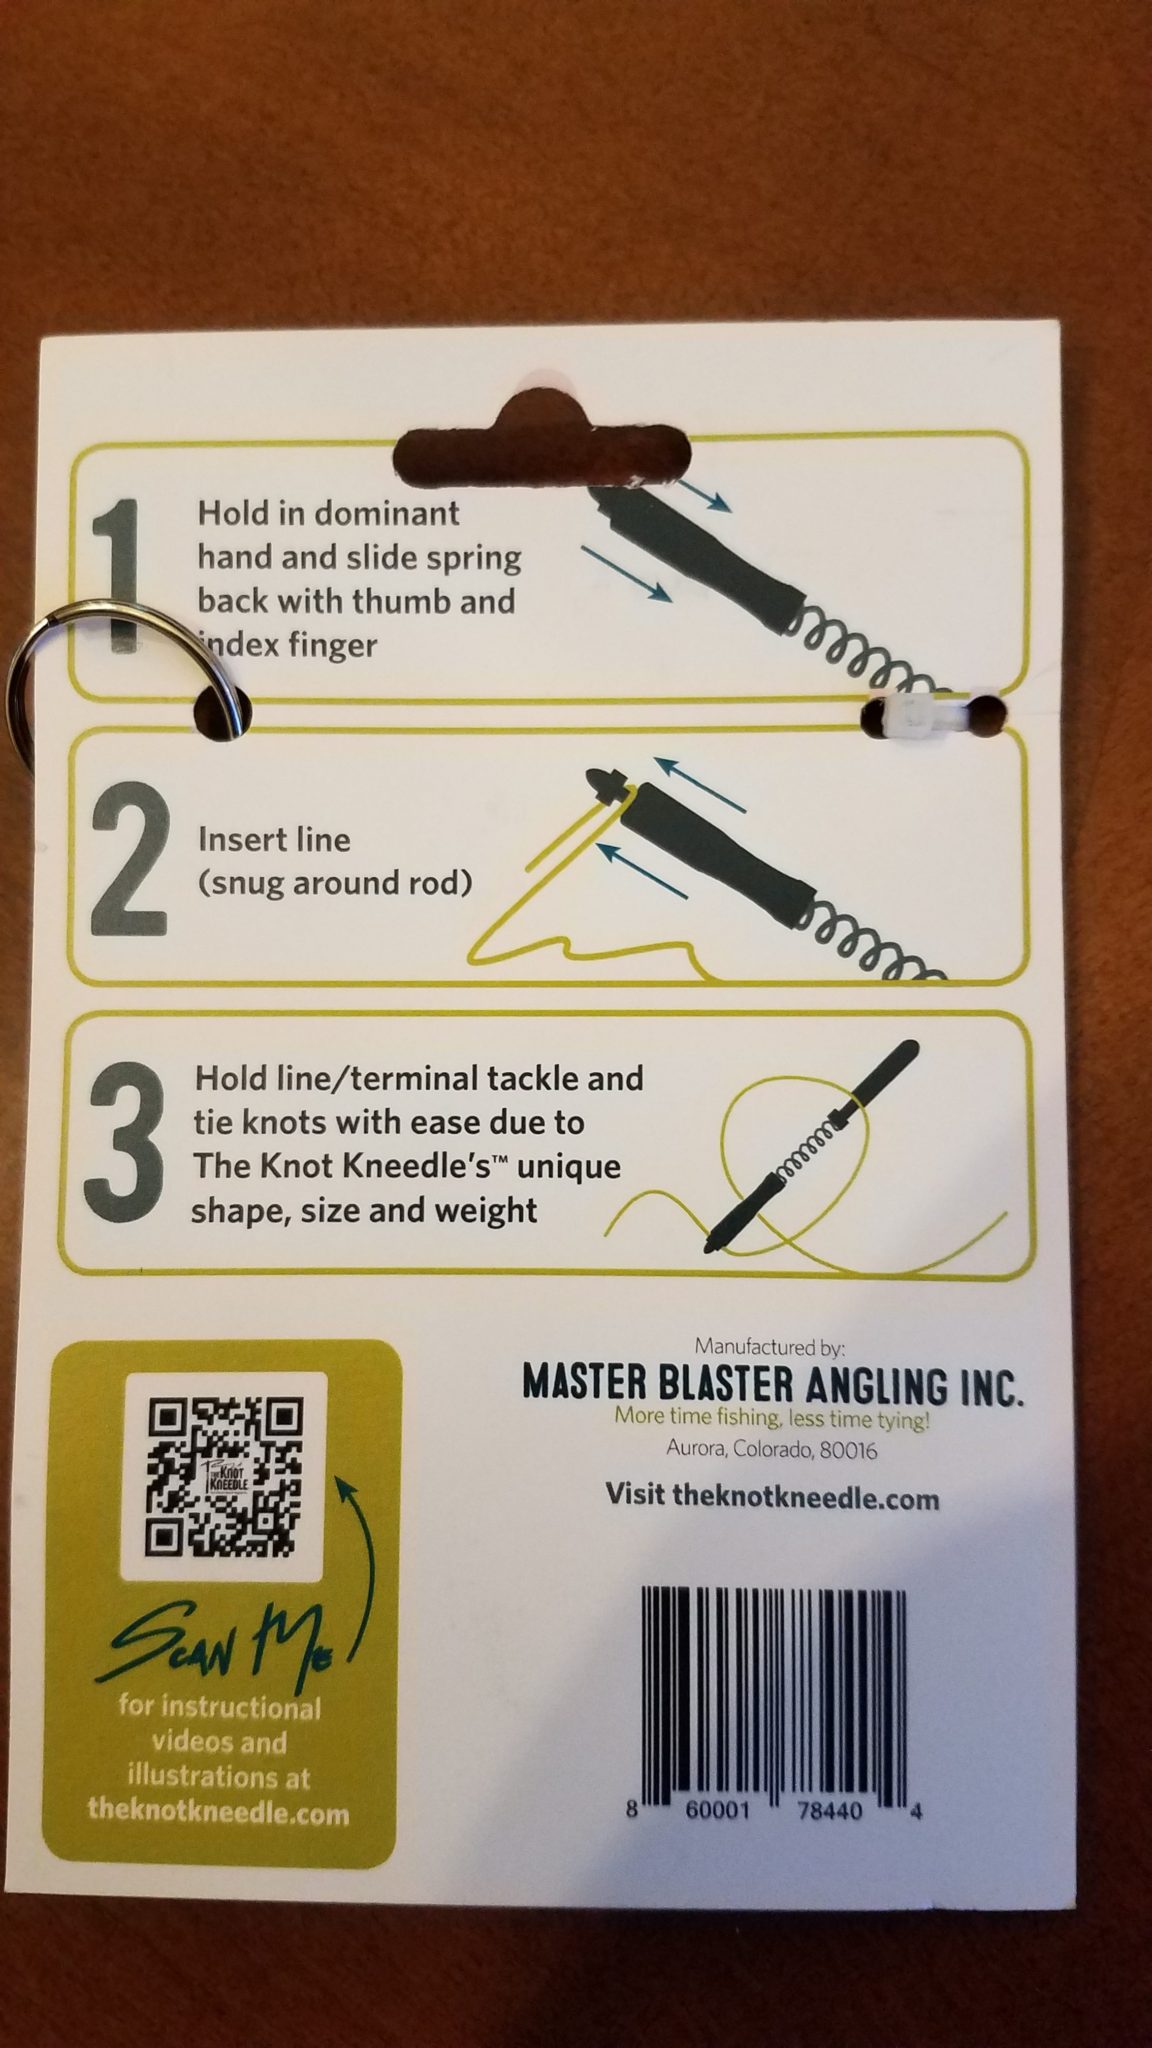 The Knot Kneedle™